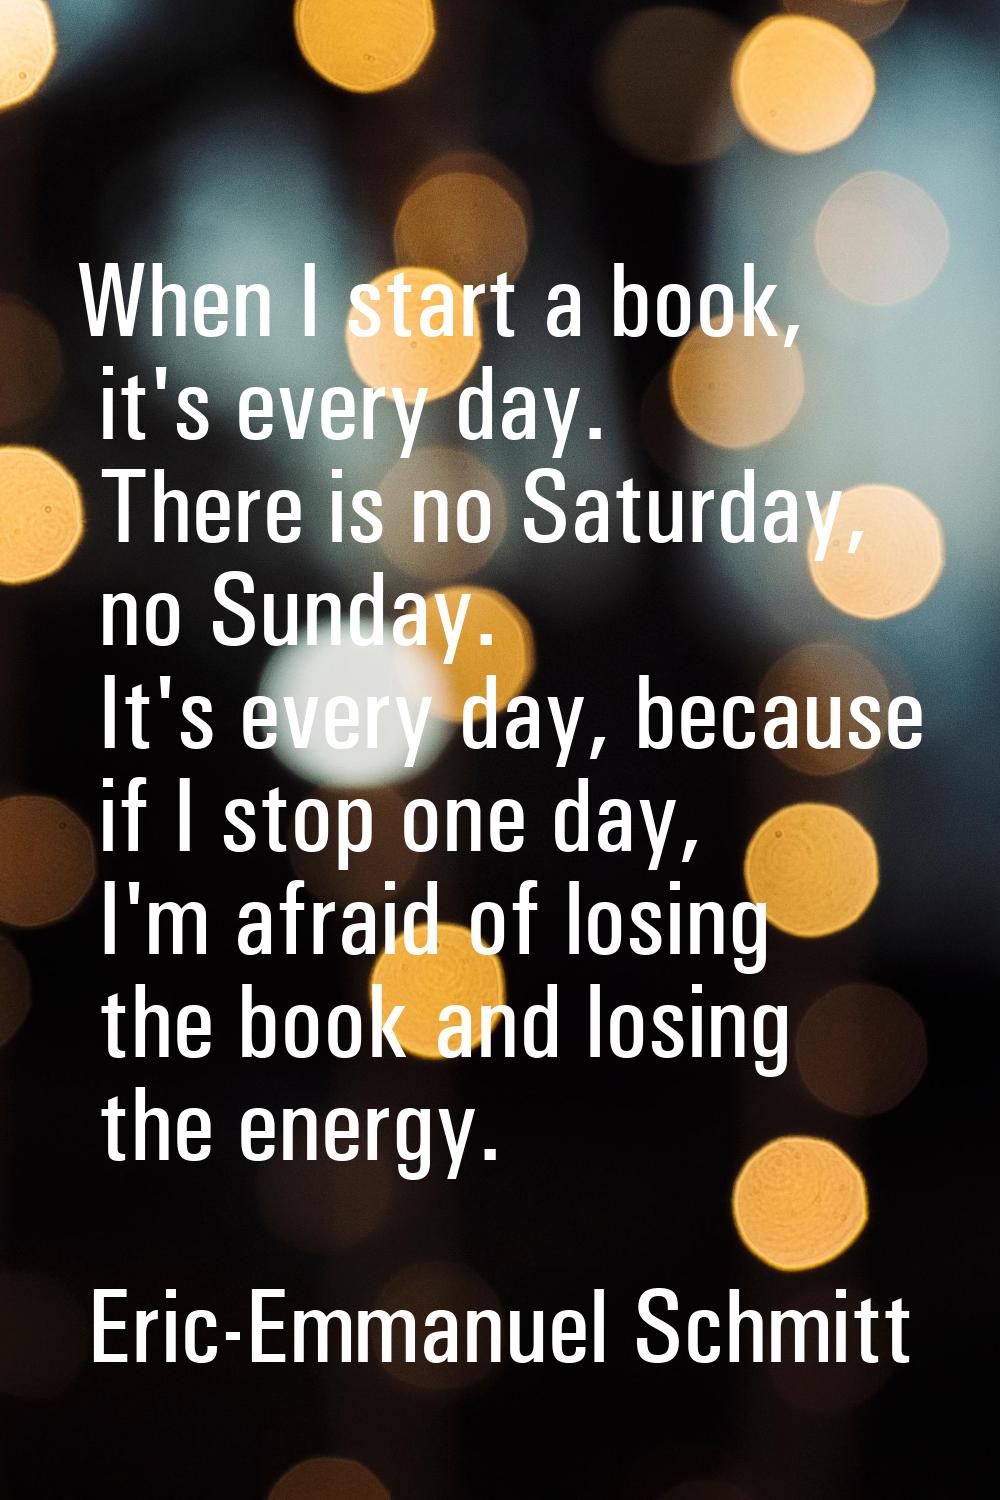 When I start a book, it's every day. There is no Saturday, no Sunday. It's every day, because if I 